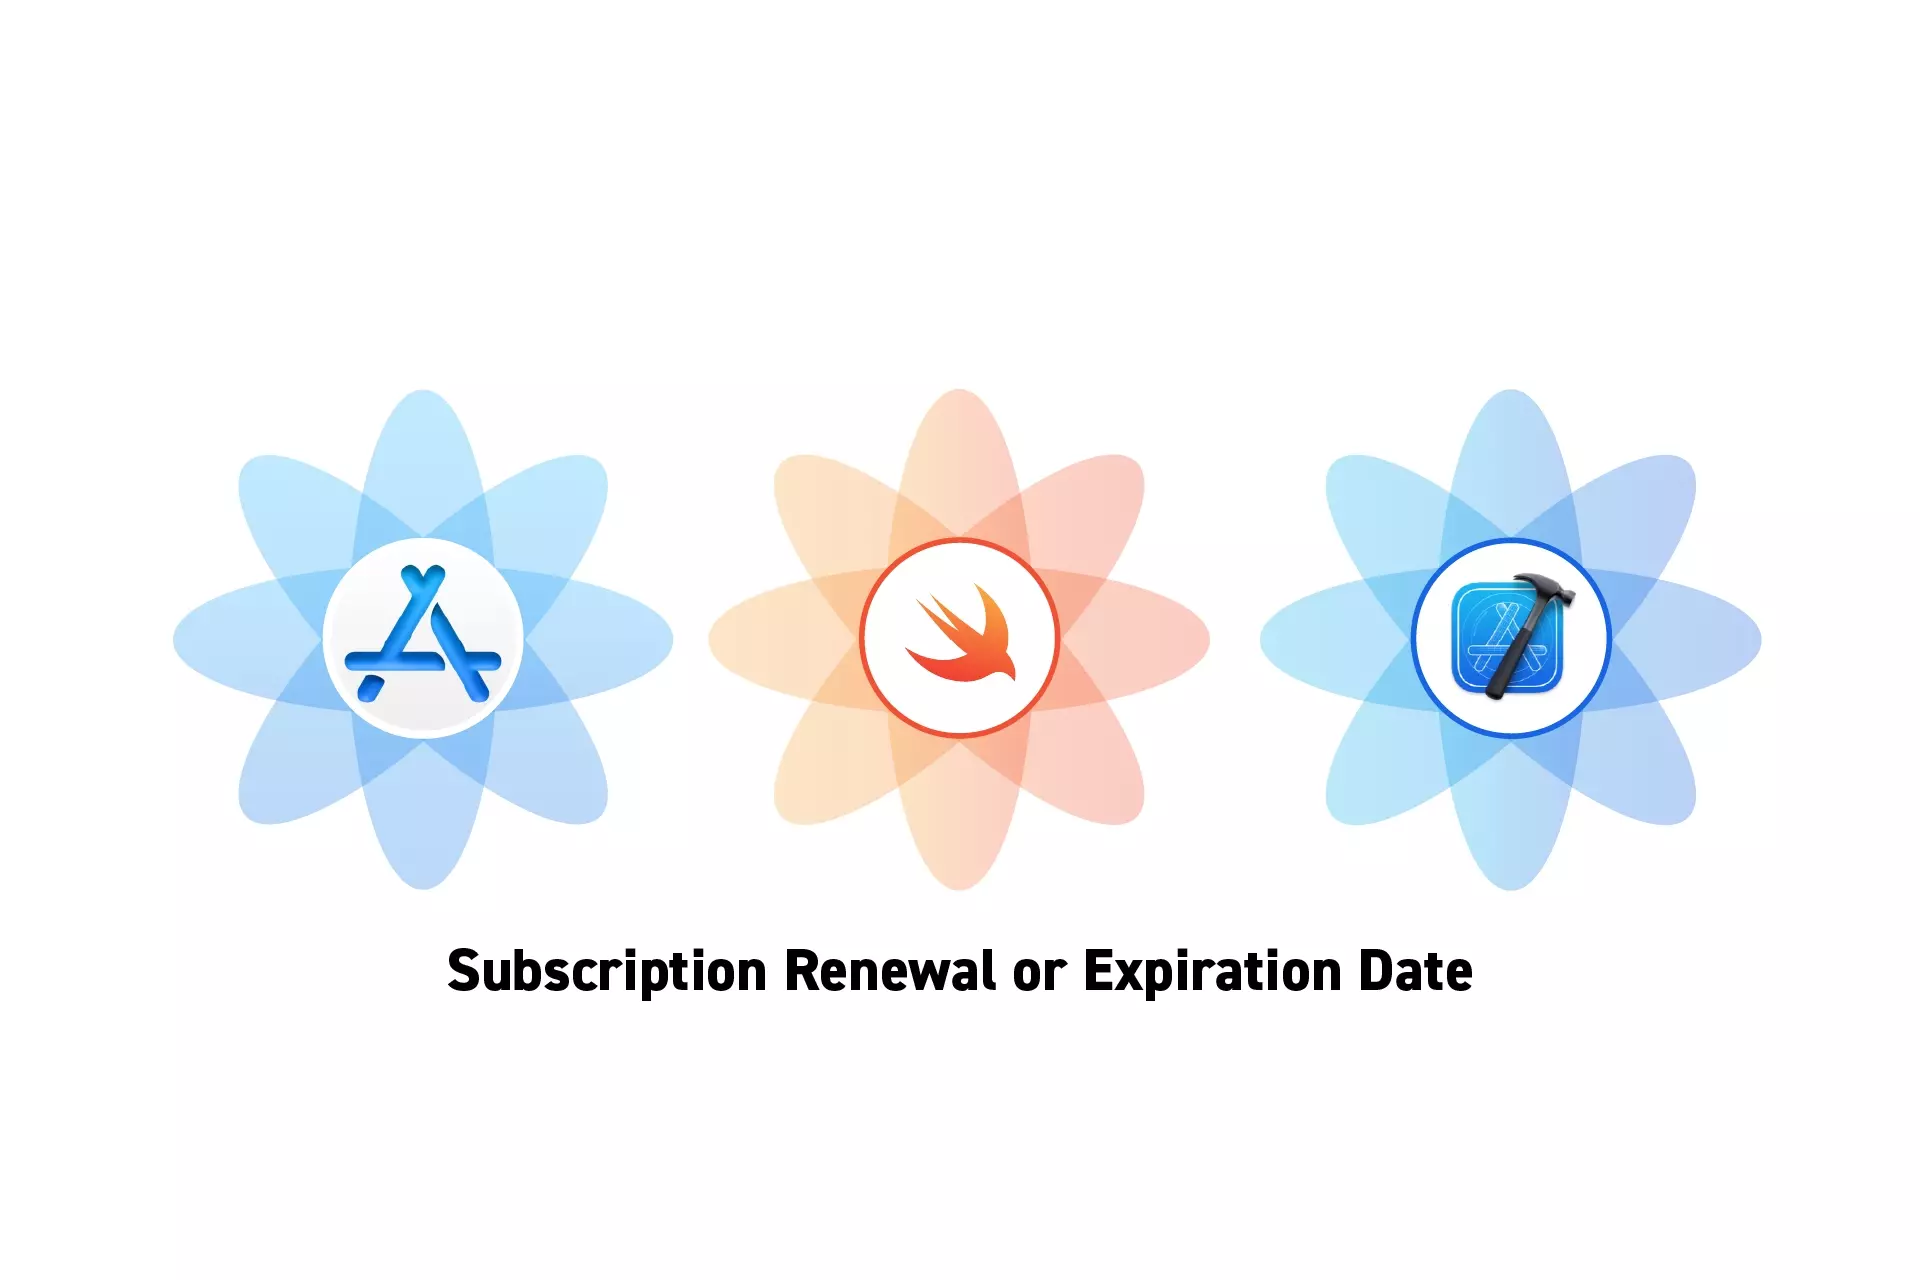 Three flowers that represent StoreKit, Swift and XCode side by side. Beneath them sits the text “Subscription Renewal or Expiration Date.”